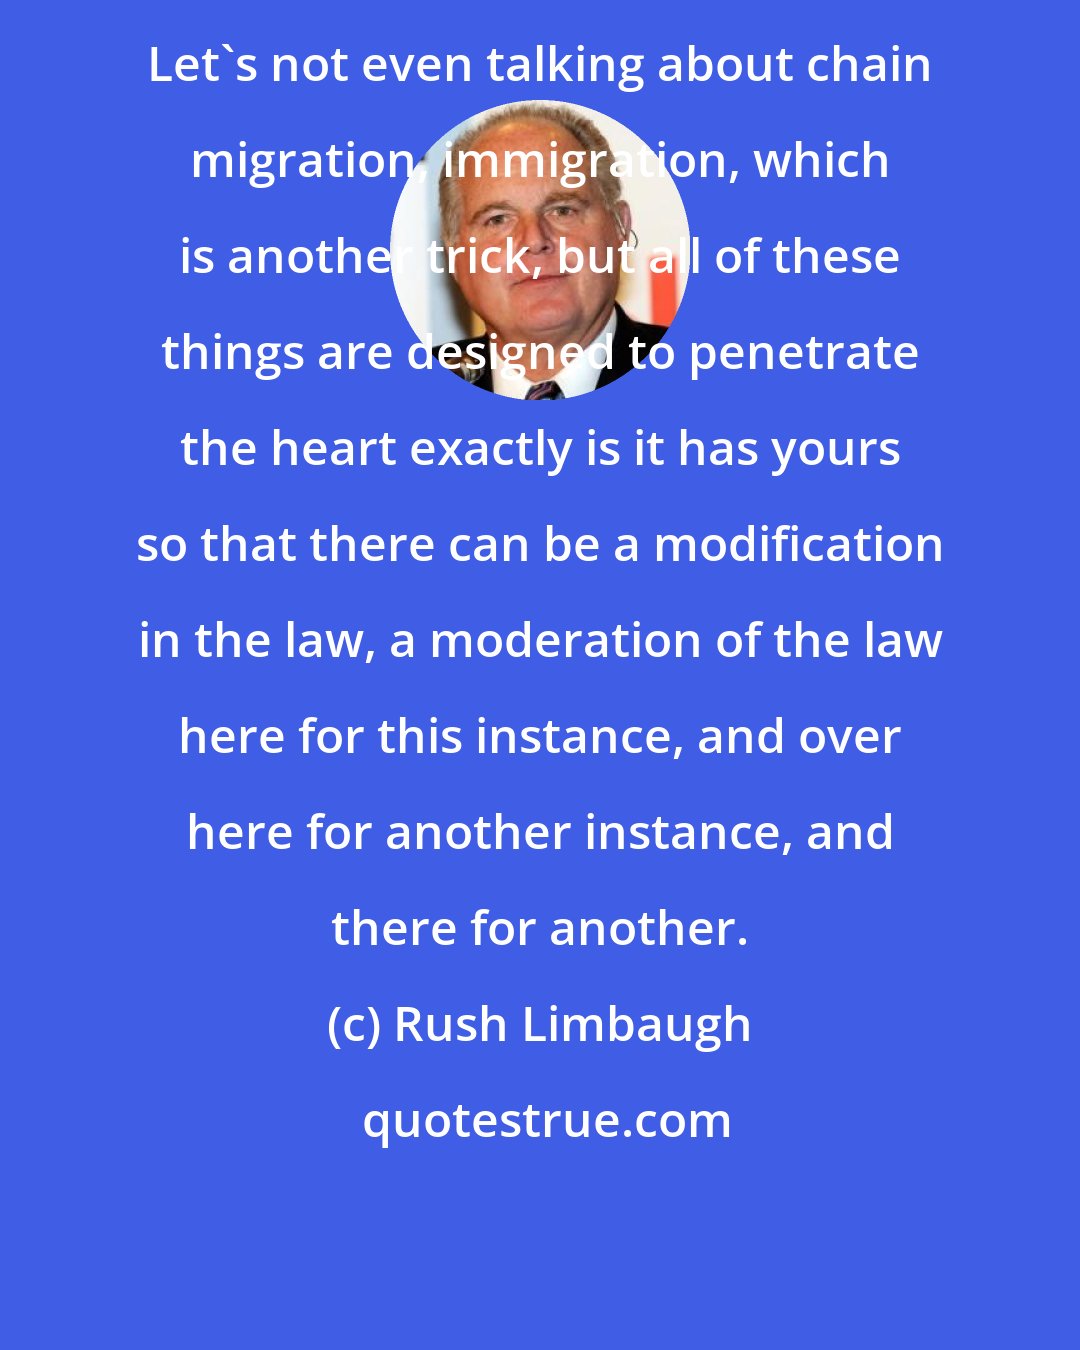 Rush Limbaugh: Let's not even talking about chain migration, immigration, which is another trick, but all of these things are designed to penetrate the heart exactly is it has yours so that there can be a modification in the law, a moderation of the law here for this instance, and over here for another instance, and there for another.